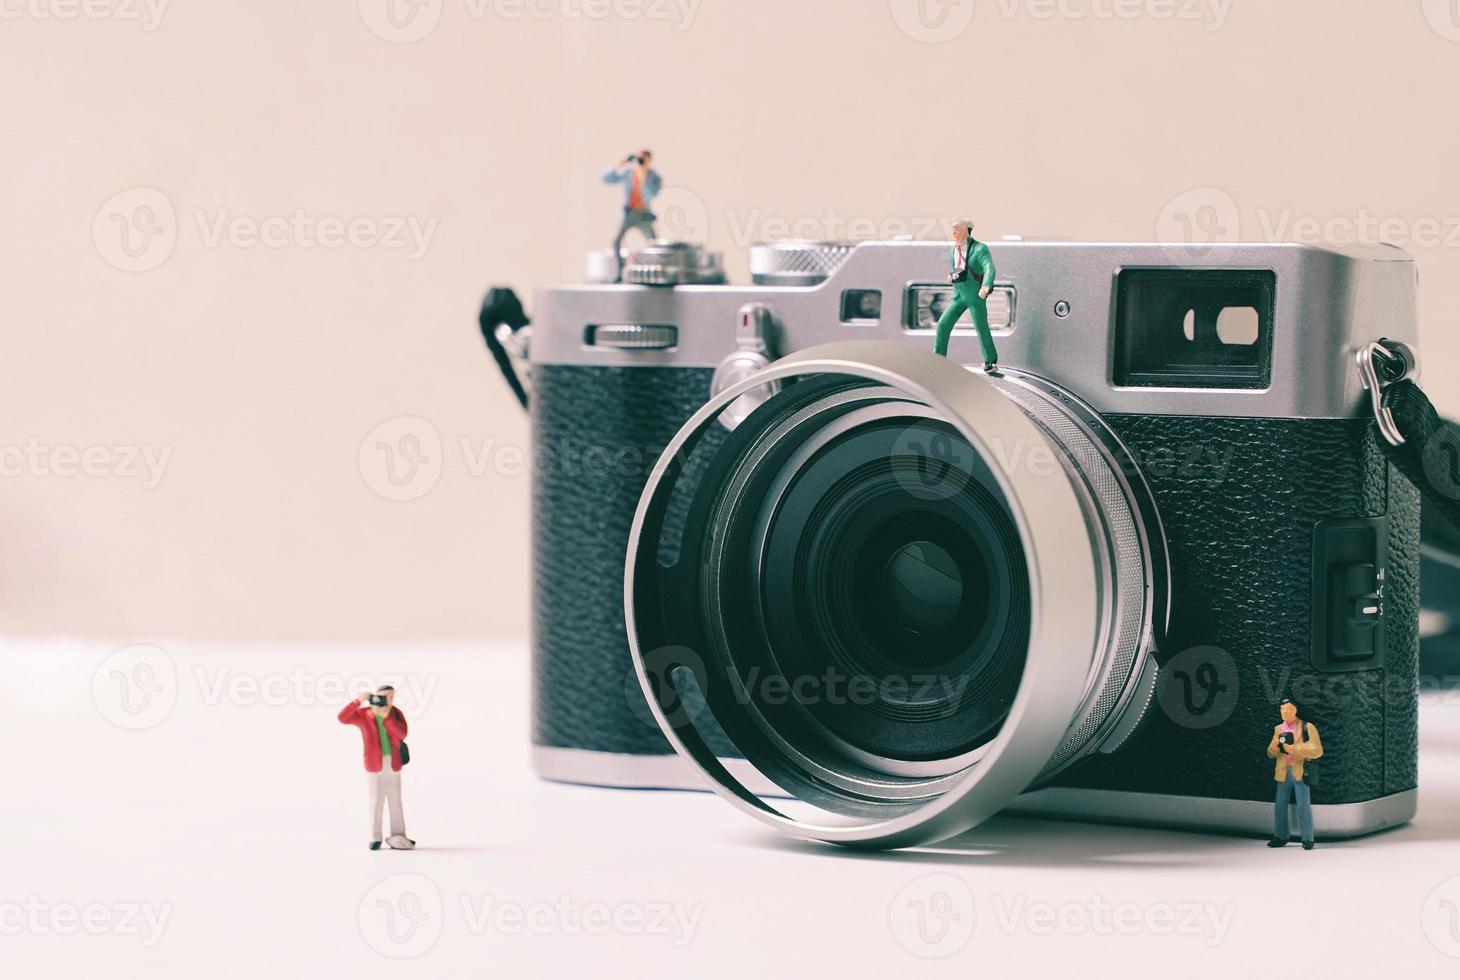 Miniature group of people photographer figures with camera, art photography concept photo